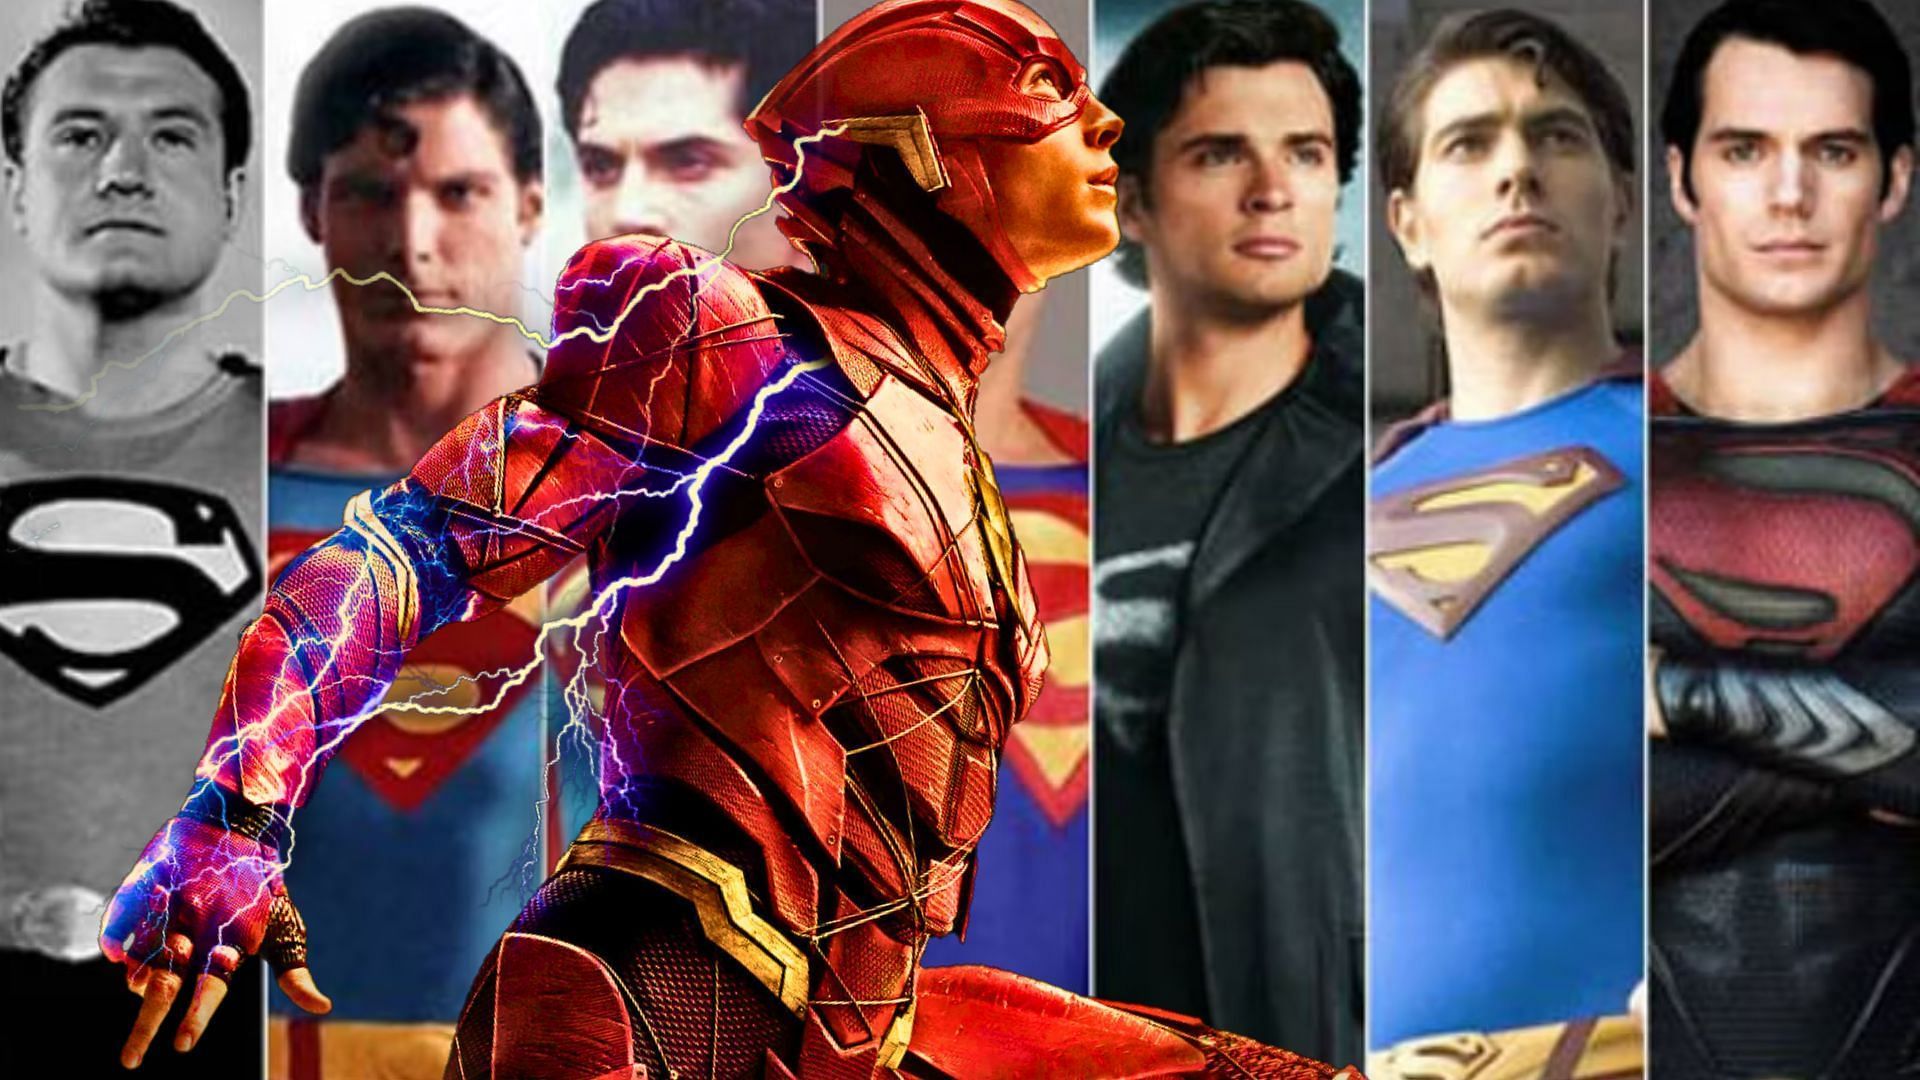 The Flash Christopher Reeve Superman Cameo: Is He in the Movie?